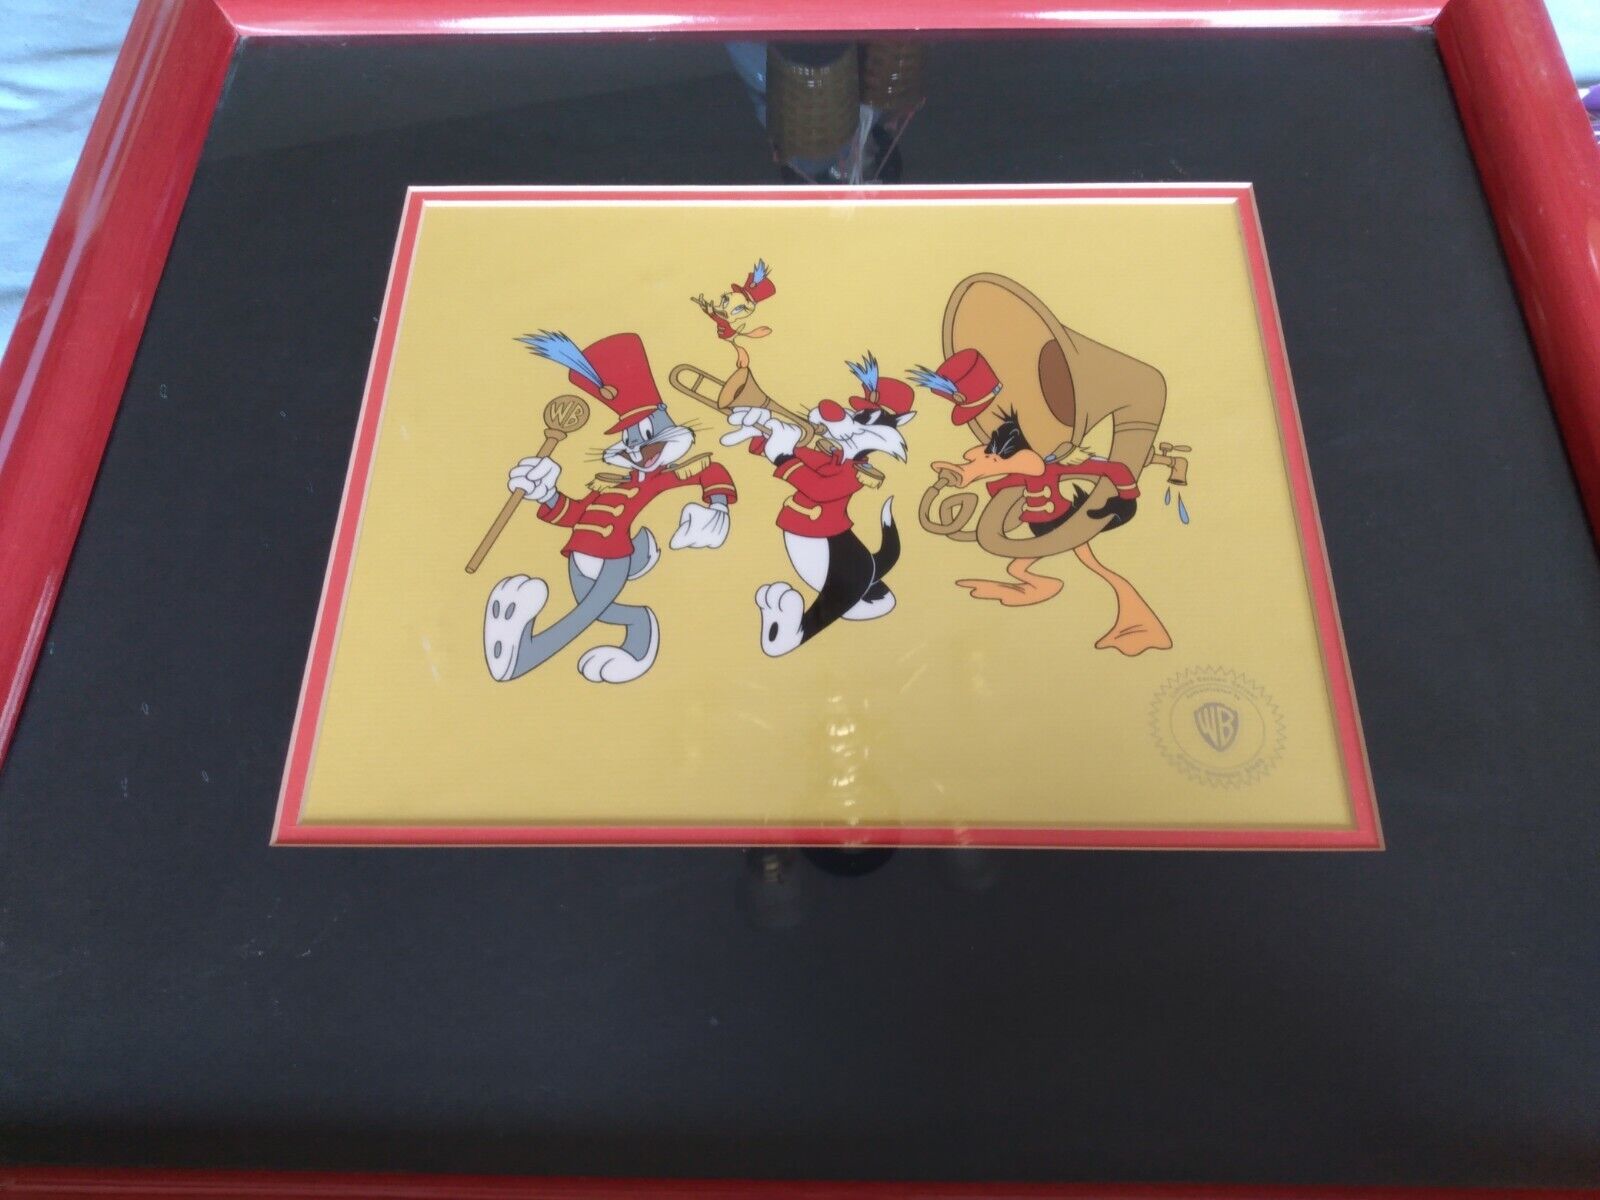 Here we have a nice 1994 Warner Bros animation Sericel framed bugs daffy X1